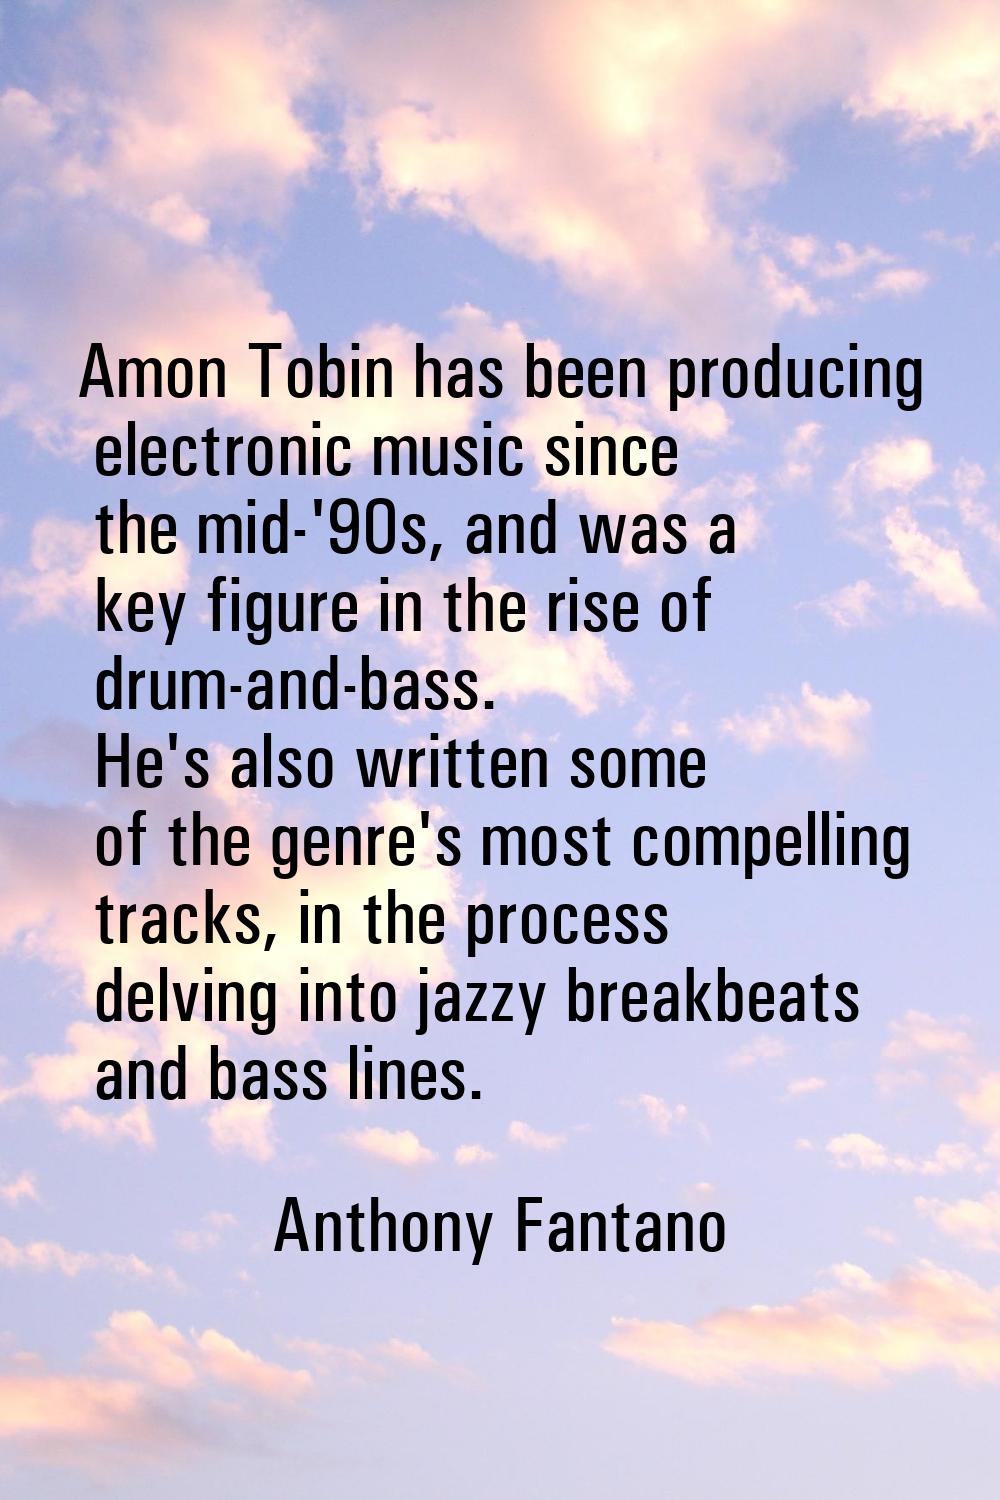 Amon Tobin has been producing electronic music since the mid-'90s, and was a key figure in the rise